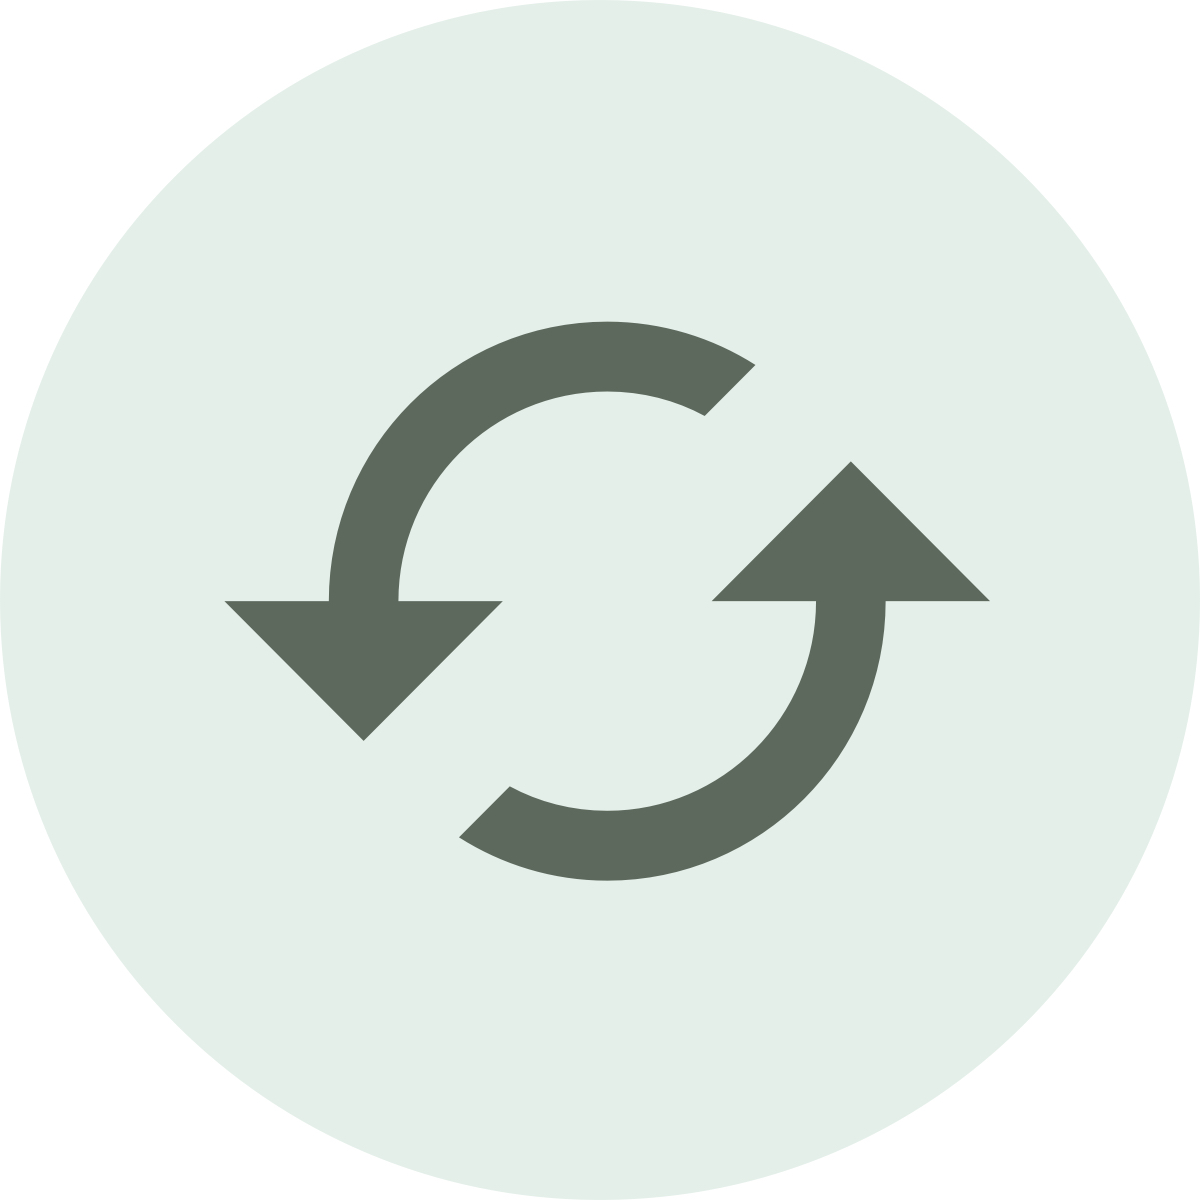 Two arrows in a circle to symbolize sustainability.